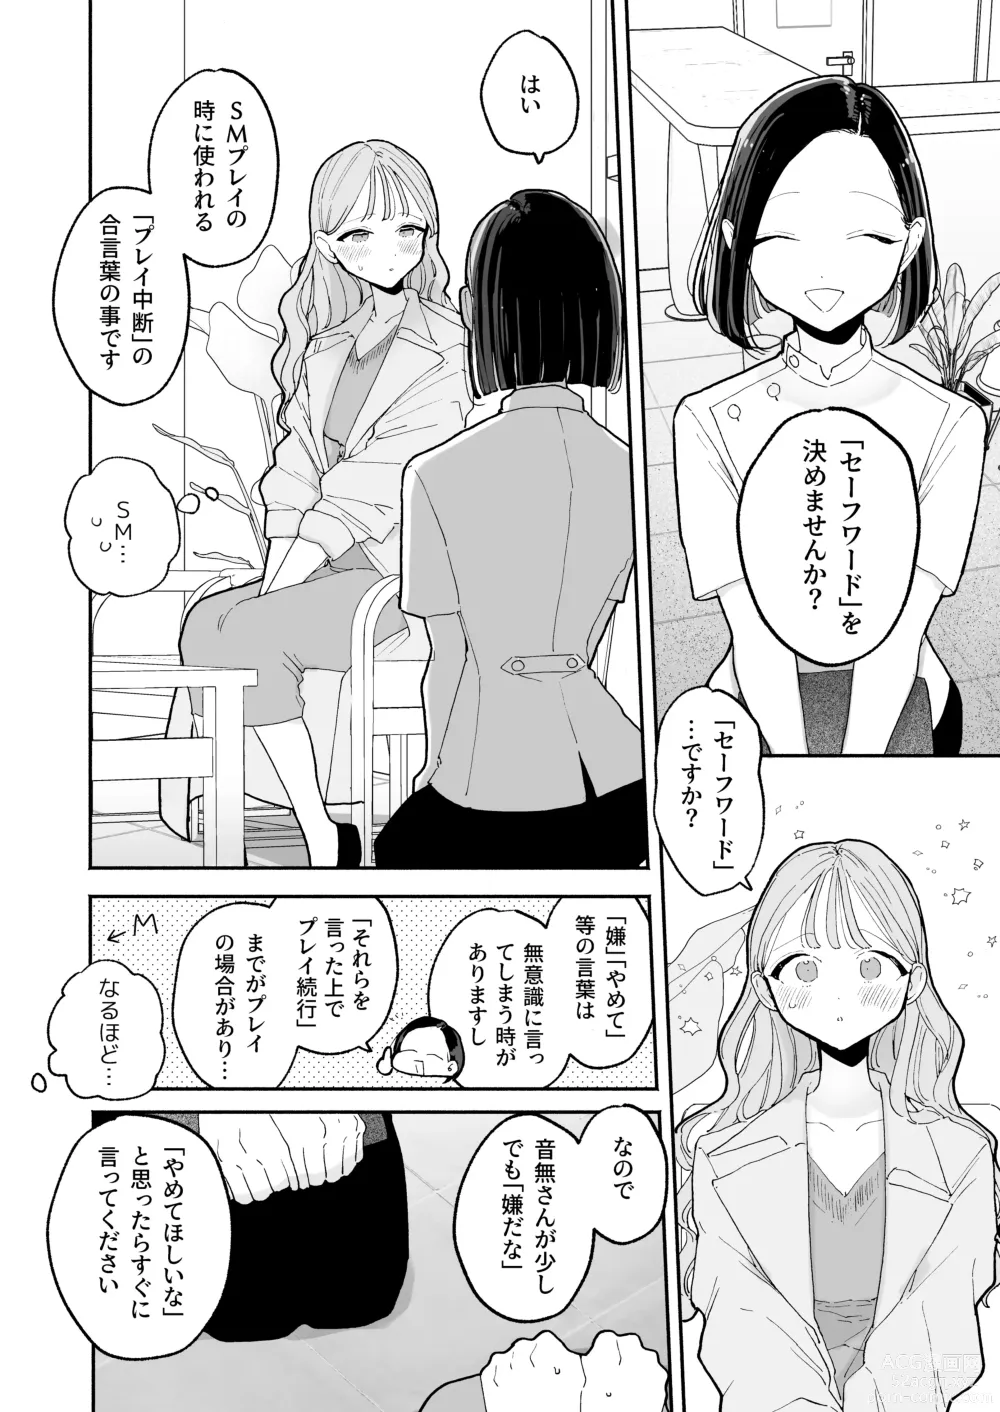 Page 6 of doujinshi Climax Reflex A story about a girl who becomes ◯◯ at an erotic massage shop in front of the station